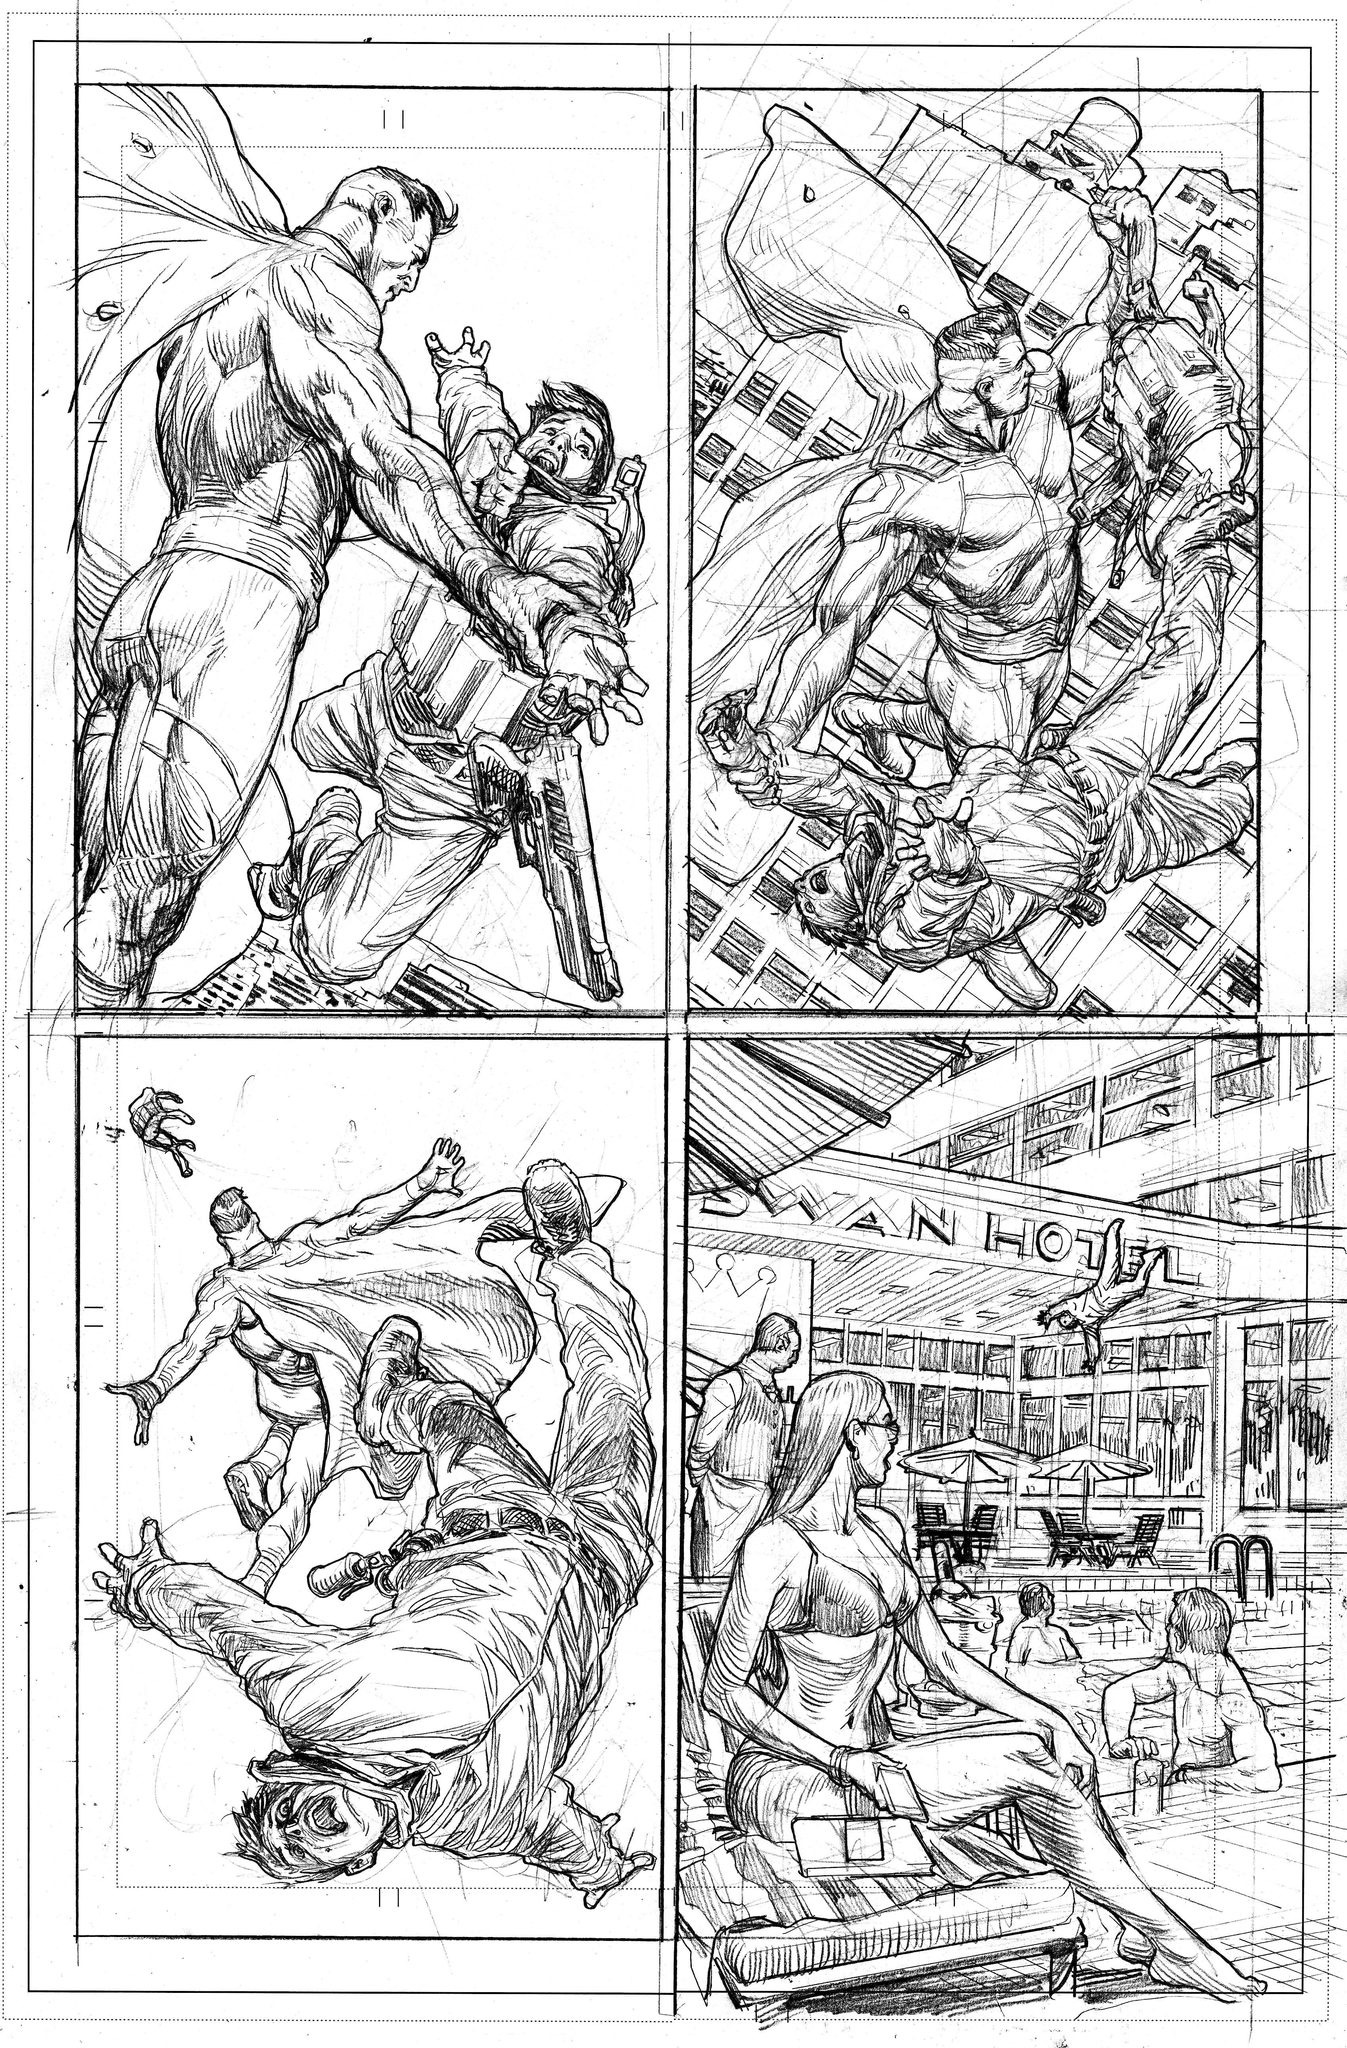 These are great pencils by Joe Bennet